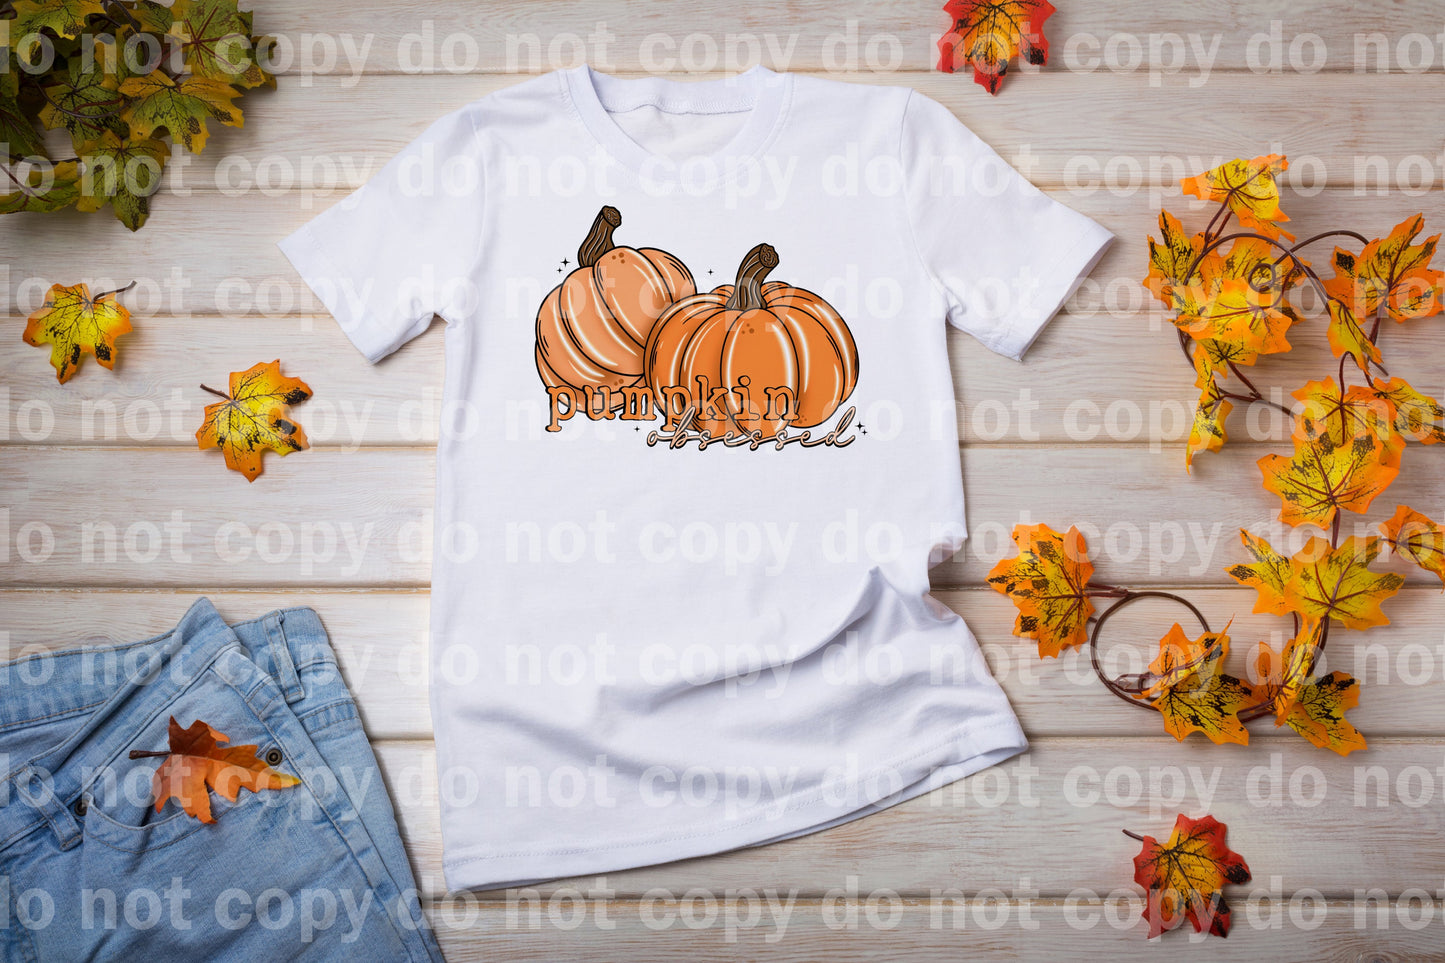 Pumpkin Obsessed Dream Print or Sublimation Print